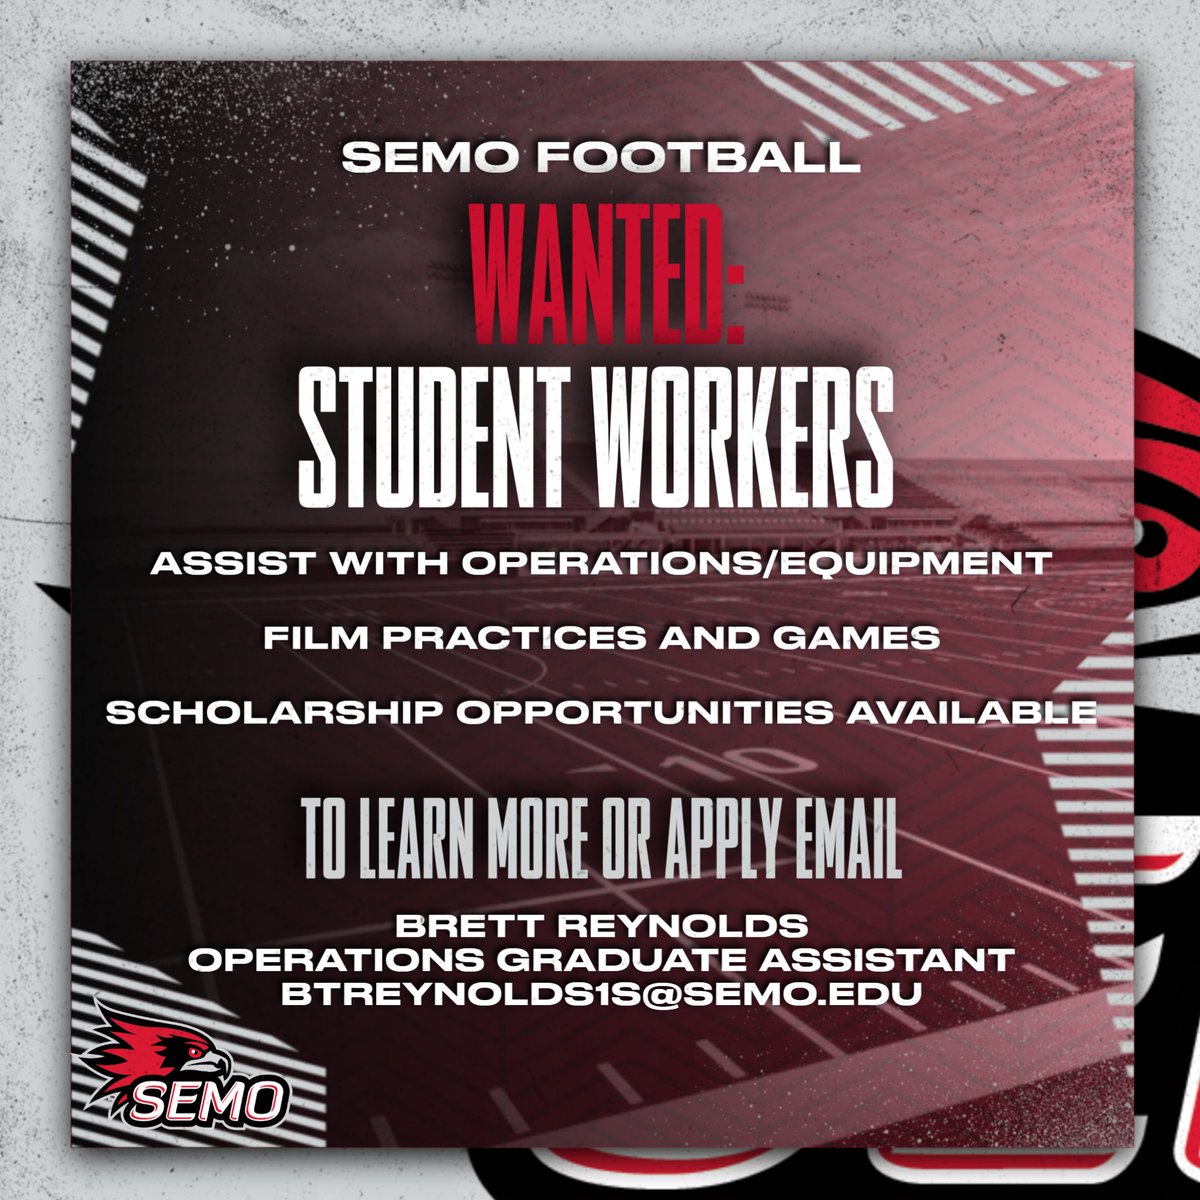 SEMO Football is looking for student workers to assist with operations and equipment, film, & more! To apply, email Brett Reynolds at btreynolds1s@semo.edu #FeelinRowdy